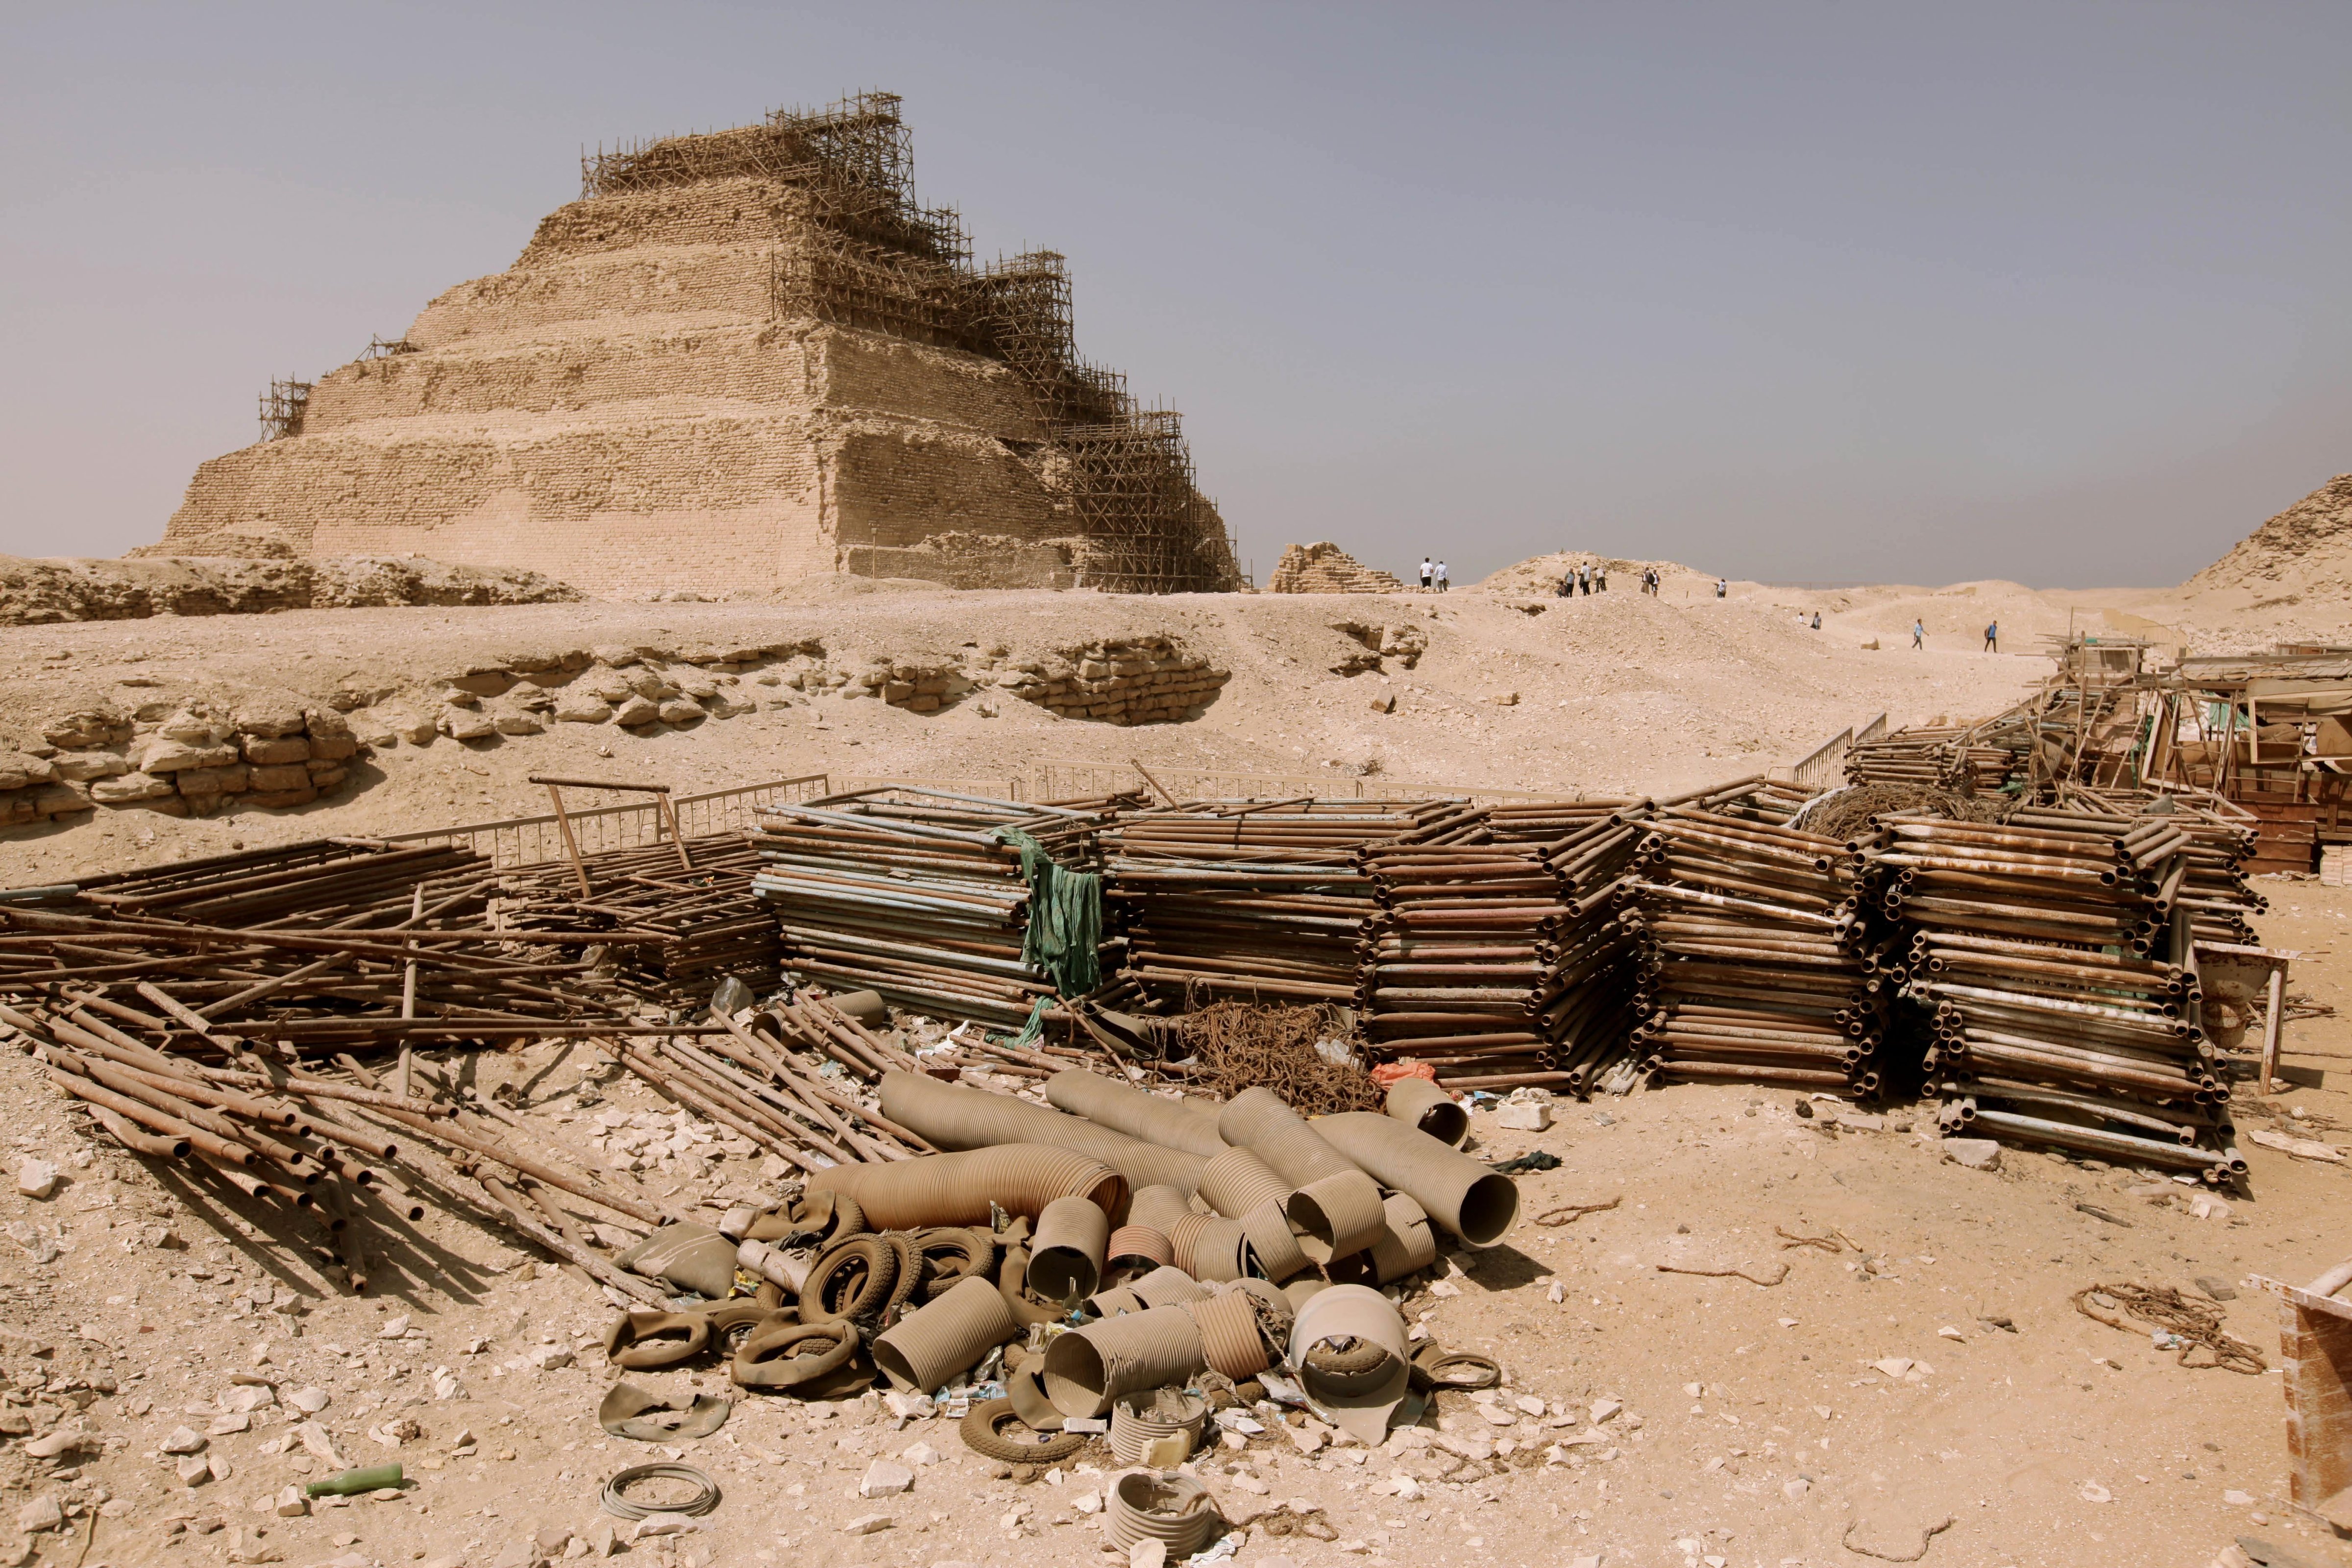 Building materials gather dust at the foot of the Djoser Pyramid in Saqqara, Egypt,  on Sept. 16, 2014 (Samuel McNeil—AP)